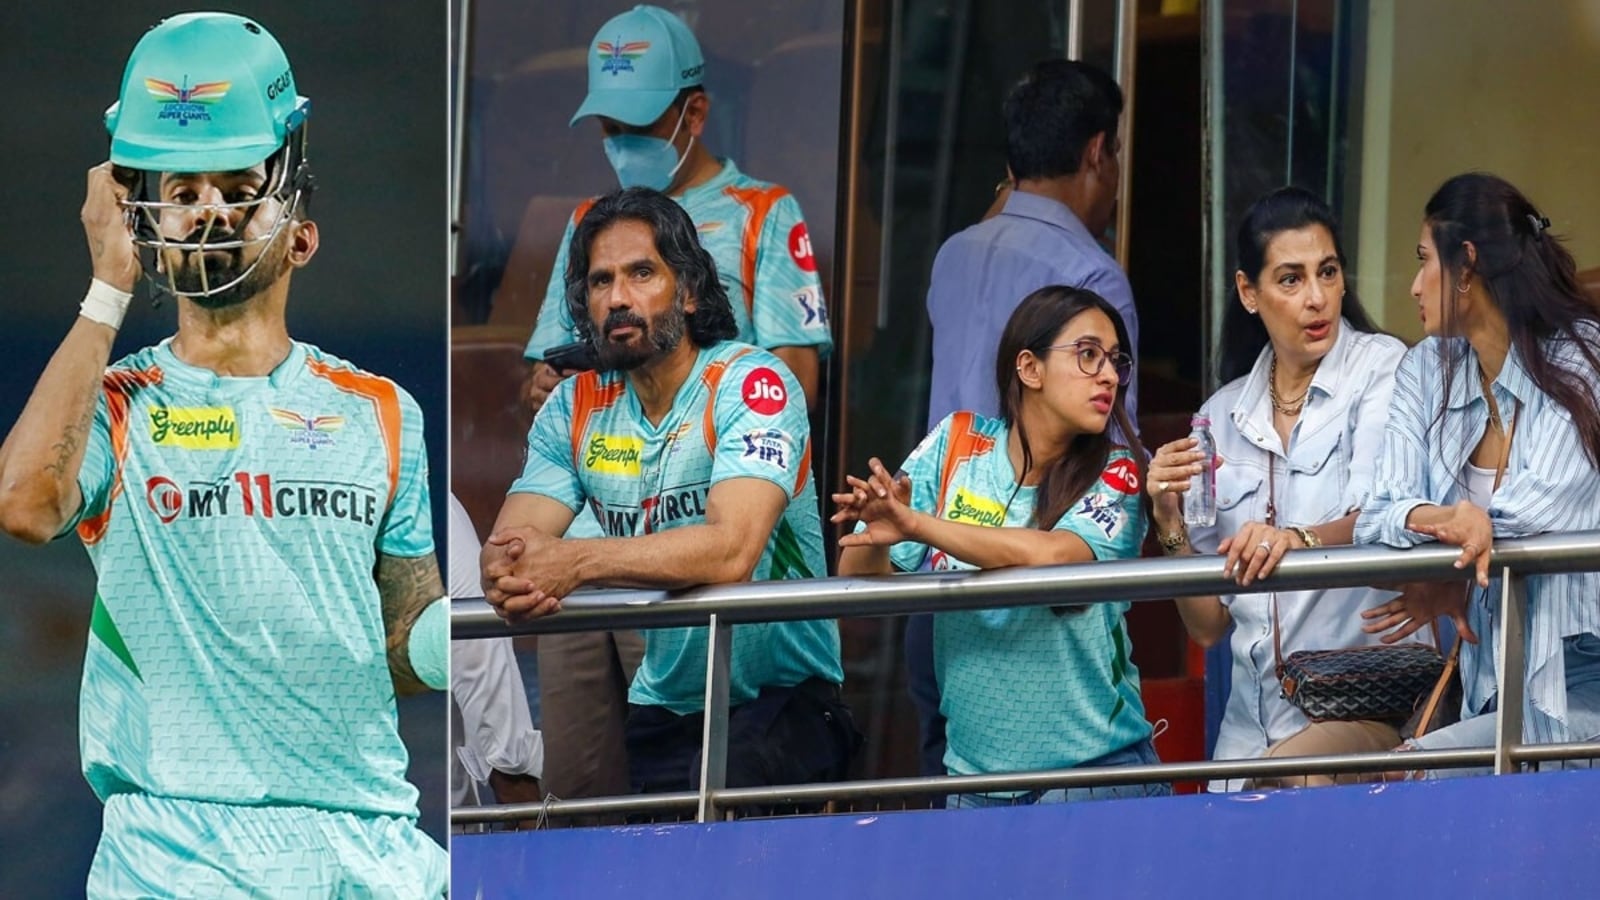 Athiya Shetty, Suniel Shetty cheer for her boyfriend KL Rahul at his IPL  match at Wankhede Stadium. See pics | Bollywood - Hindustan Times